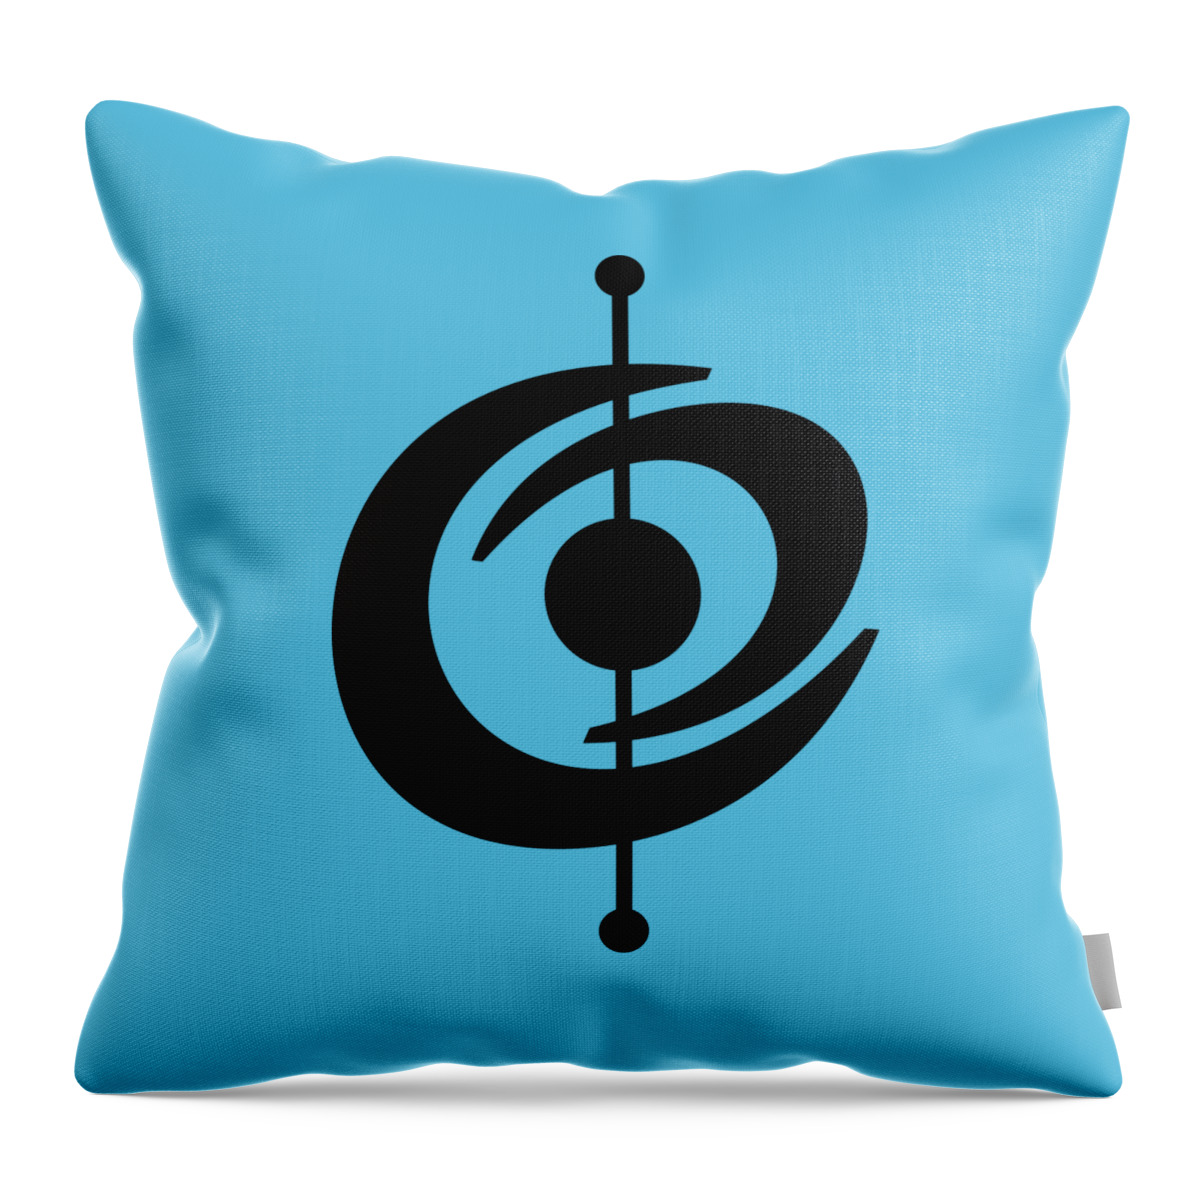  Throw Pillow featuring the digital art Atomic Shape 2 by Donna Mibus